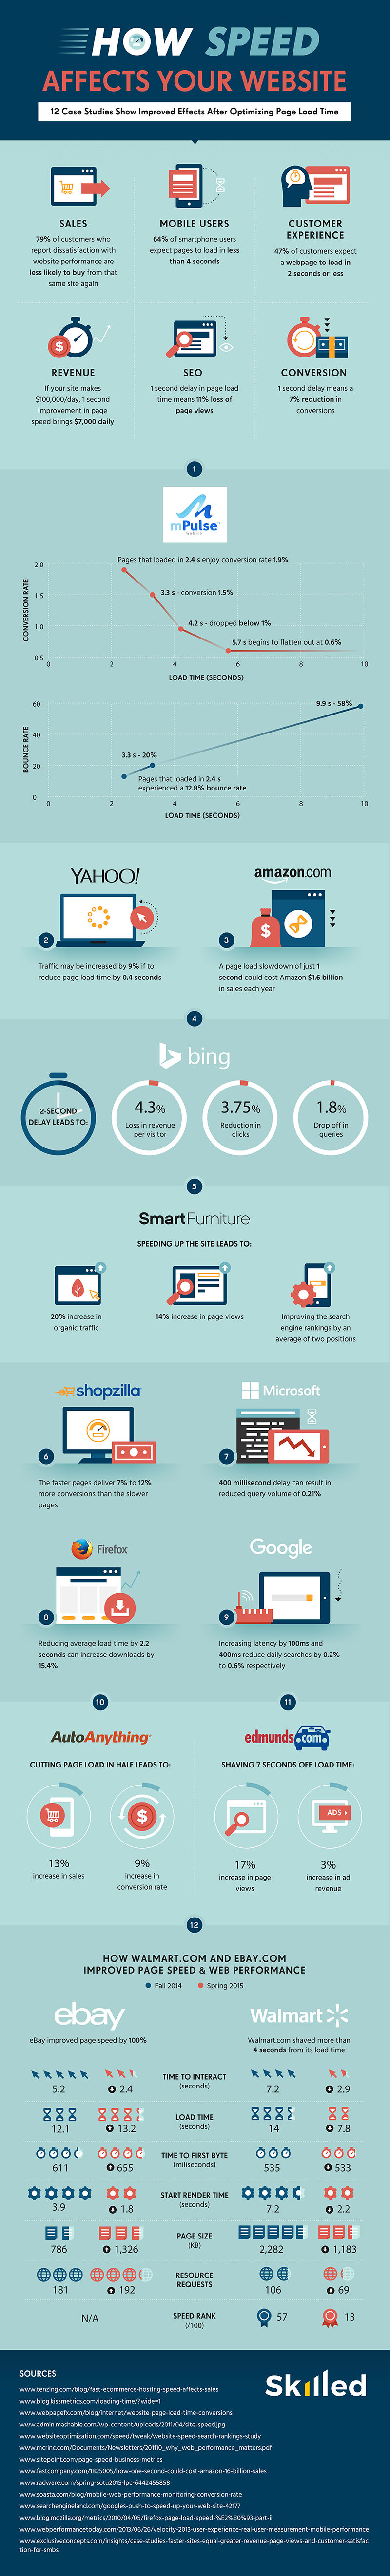 website-speed_infographic_skilled_final